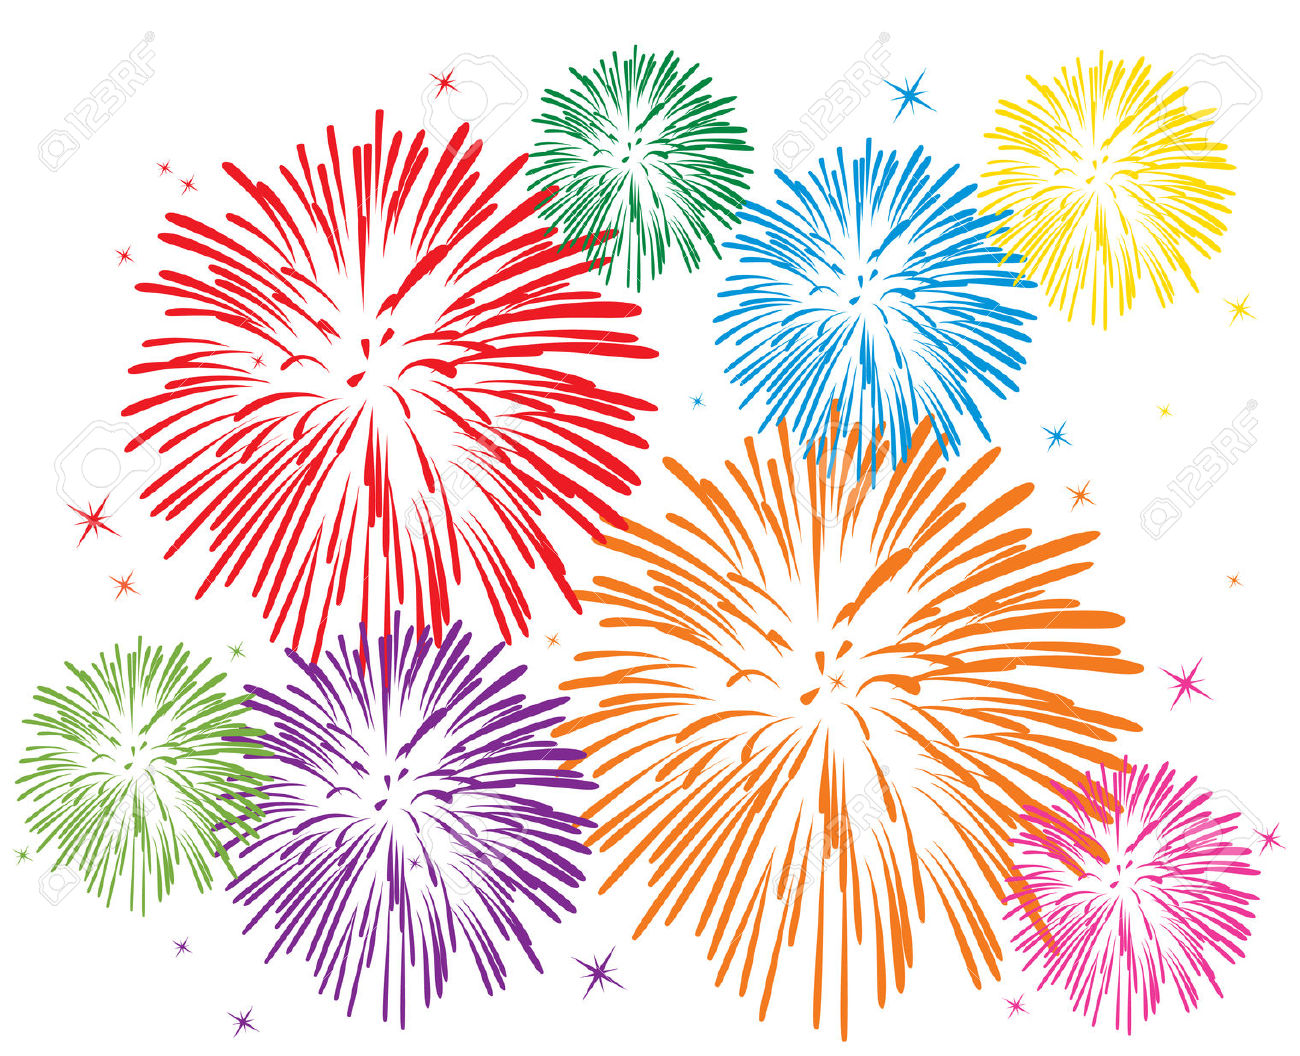 Fireworks Clipart #6726 - Clipart Of Fireworks